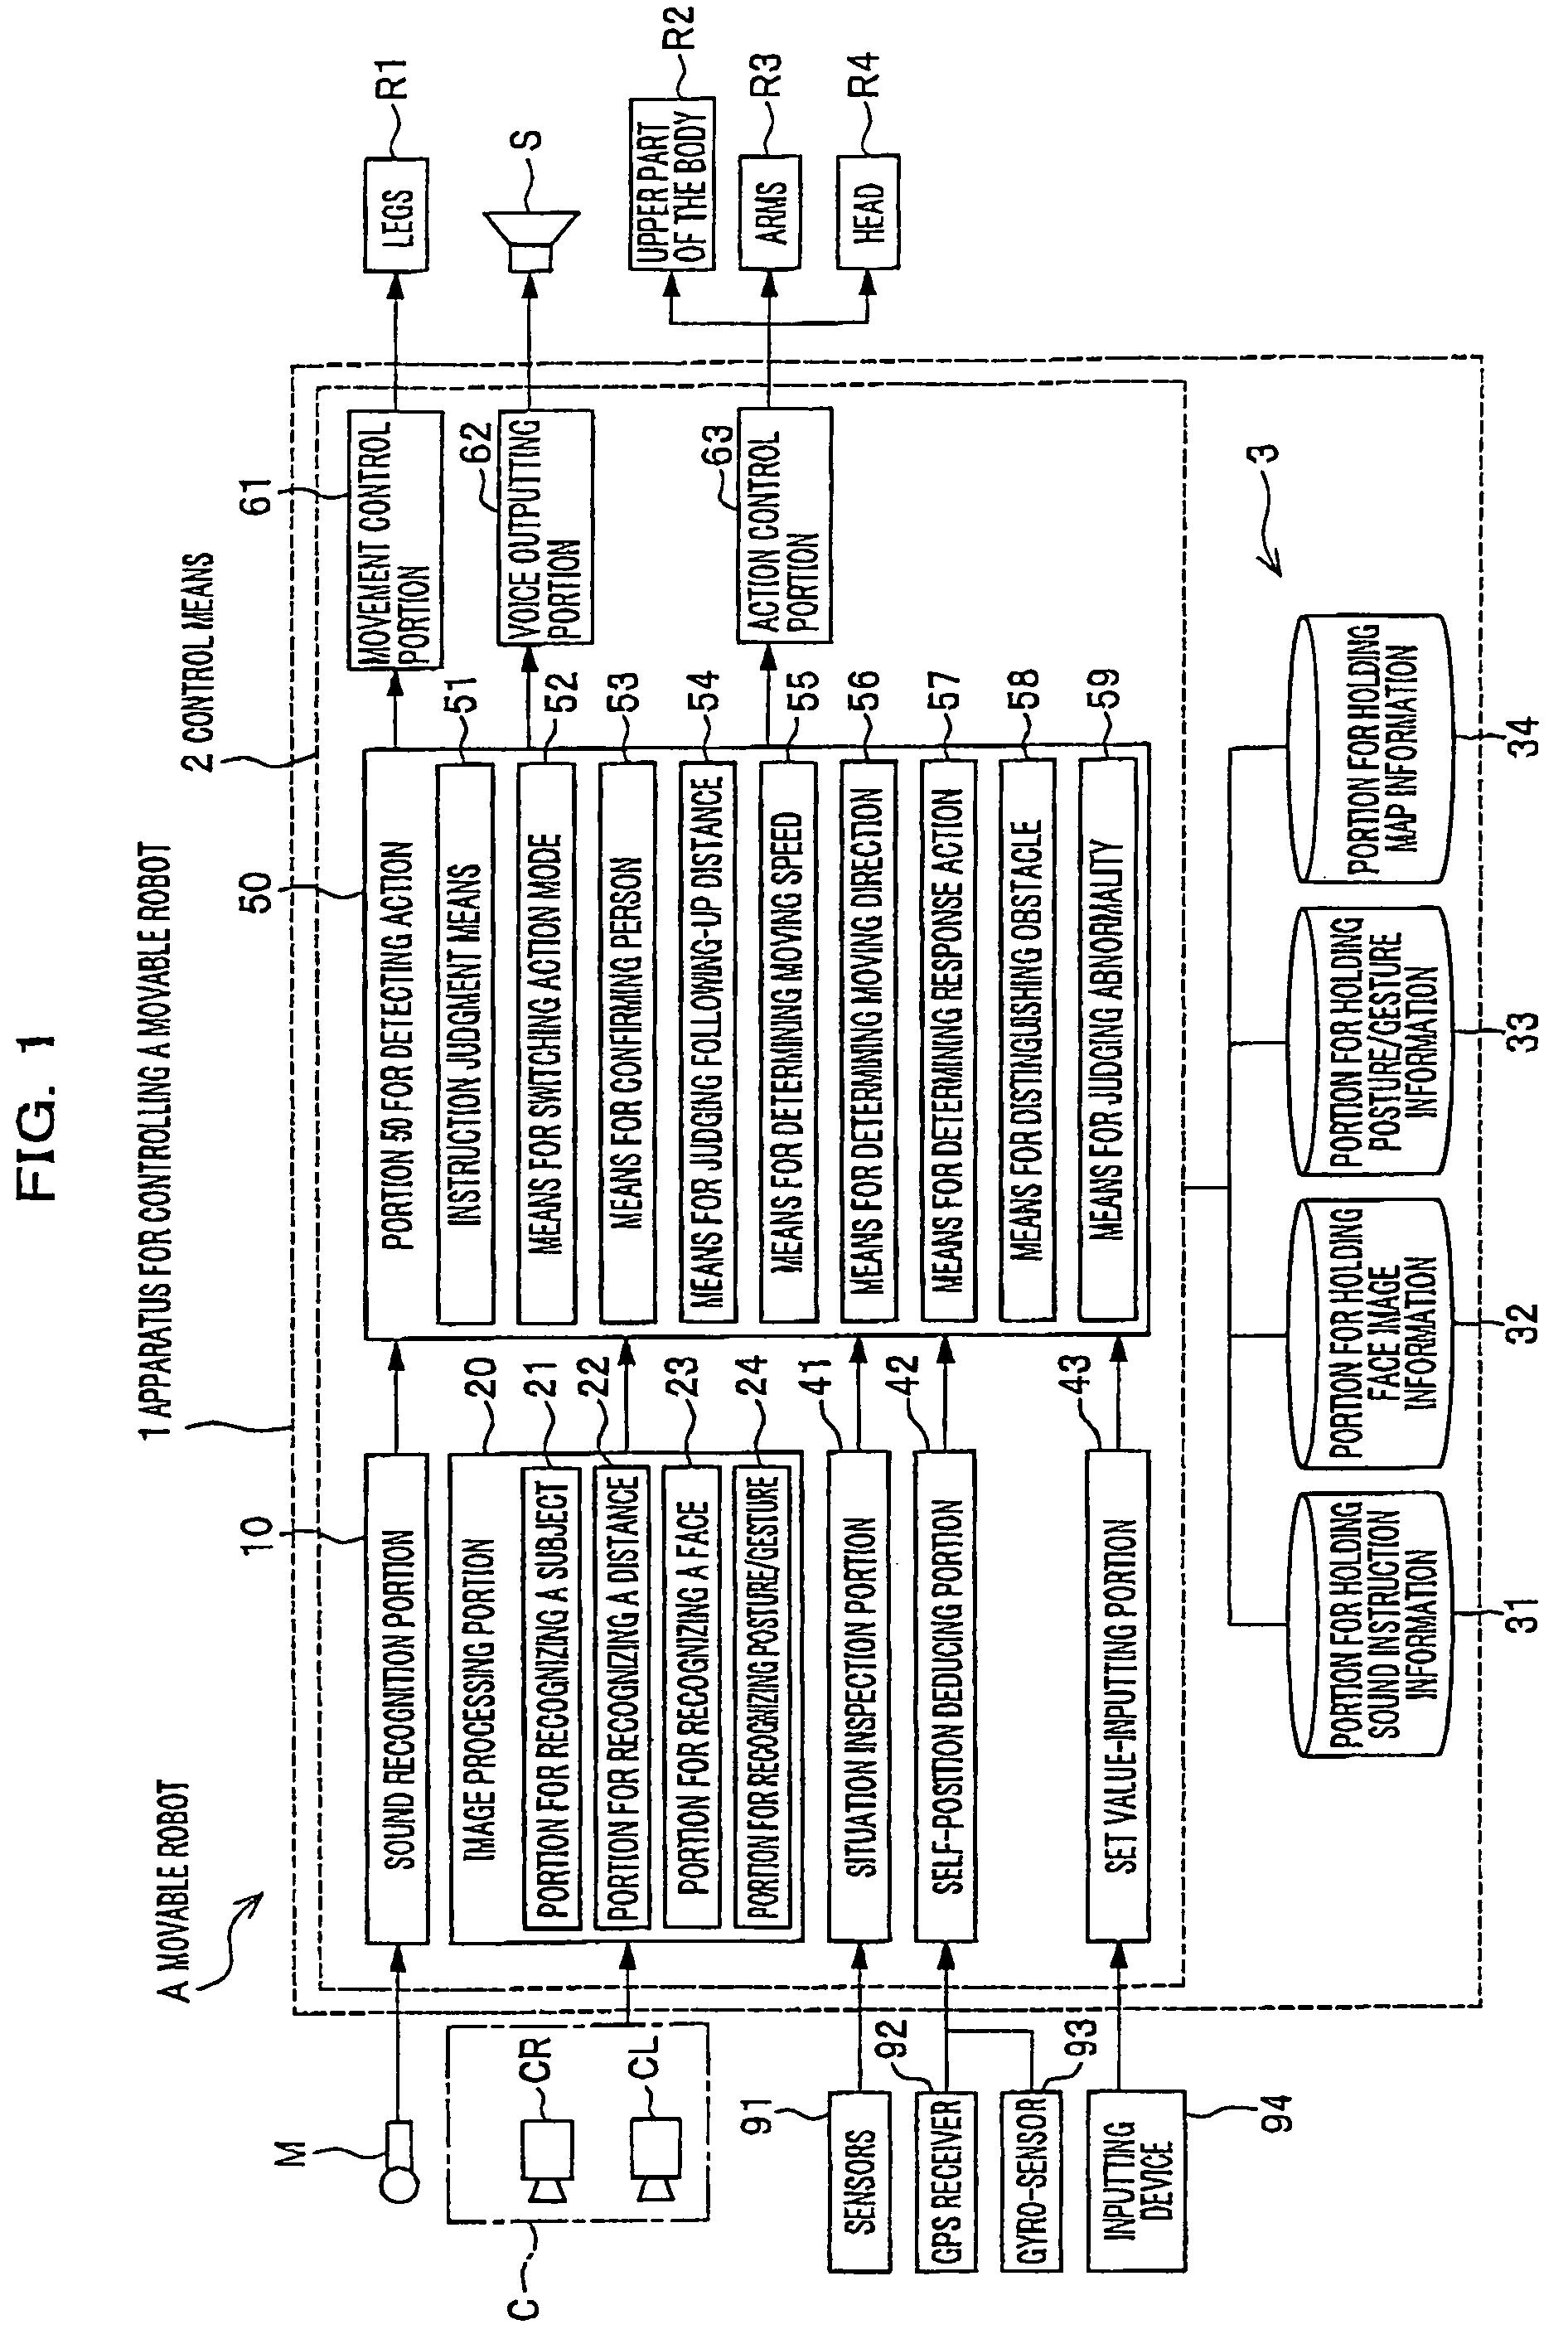 Apparatus, process, and program for controlling movable robot control